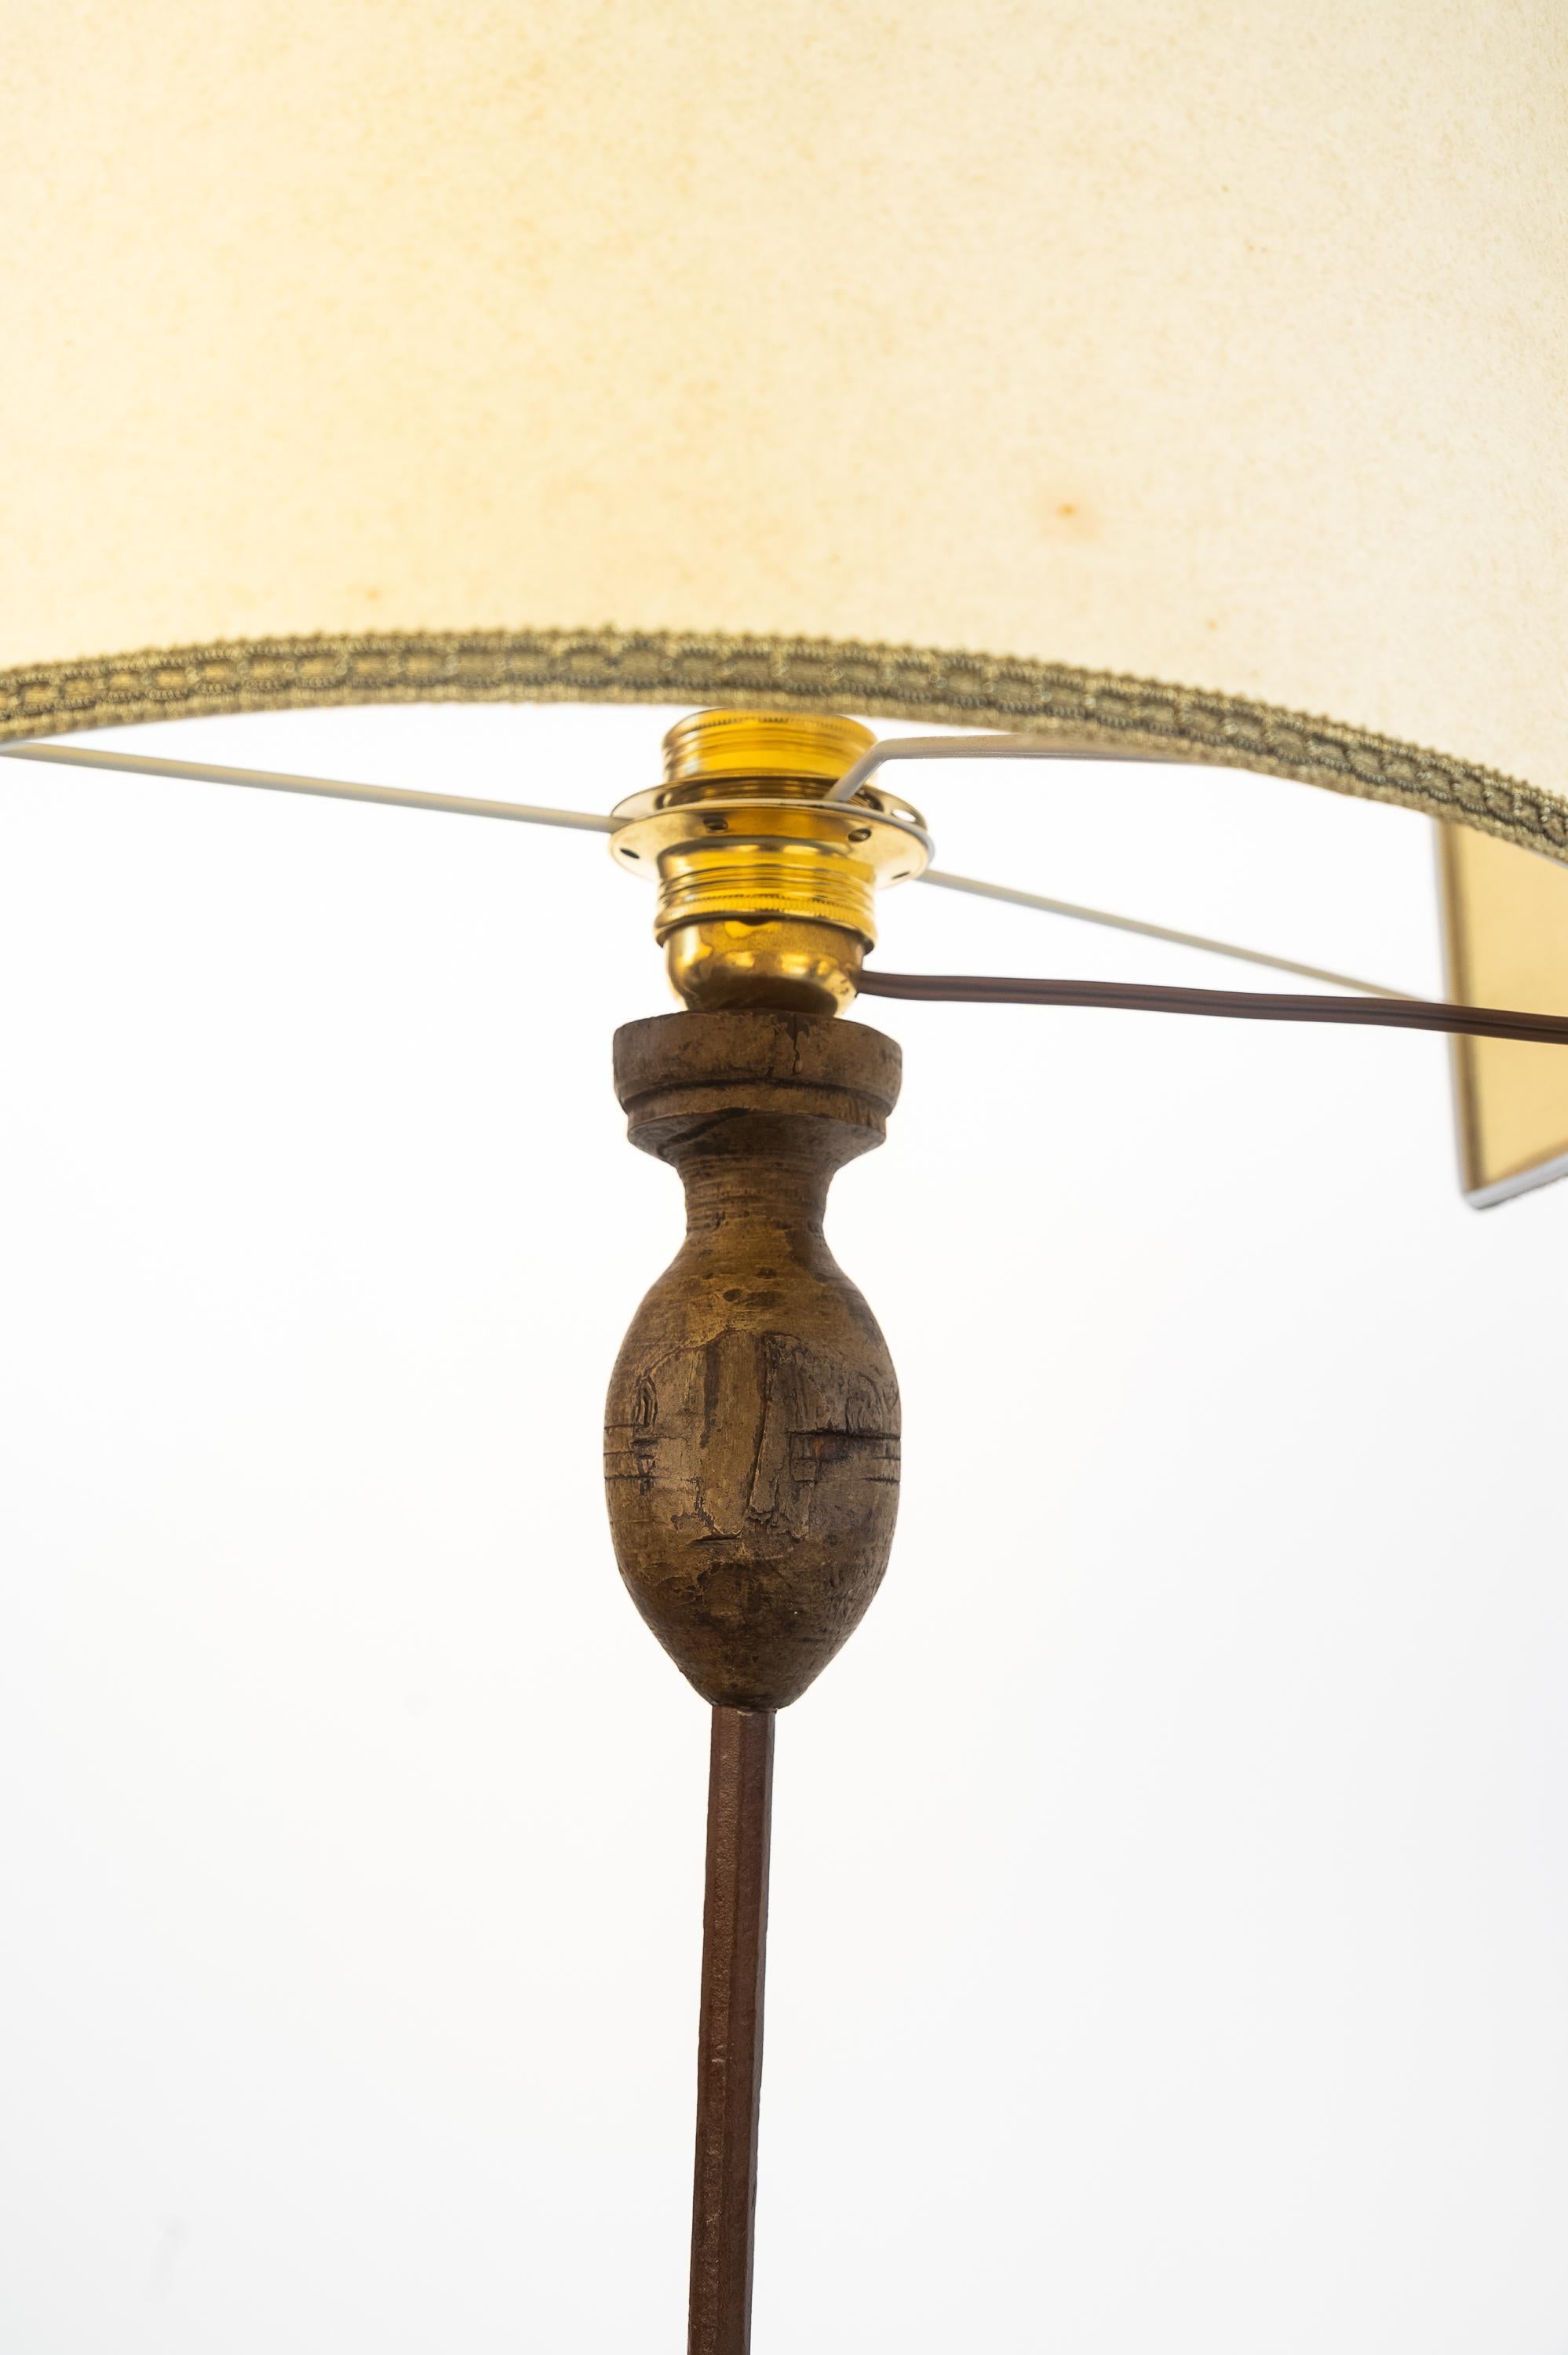 Forged iron floor lamp, early 1900s. 
Beautiful wrought iron floor lamp with four supporting legs, fixed with steel rivets. The base that holds the lamp holder is made of turned wood. In the center of the rod is an iron ornament. The wiring has been